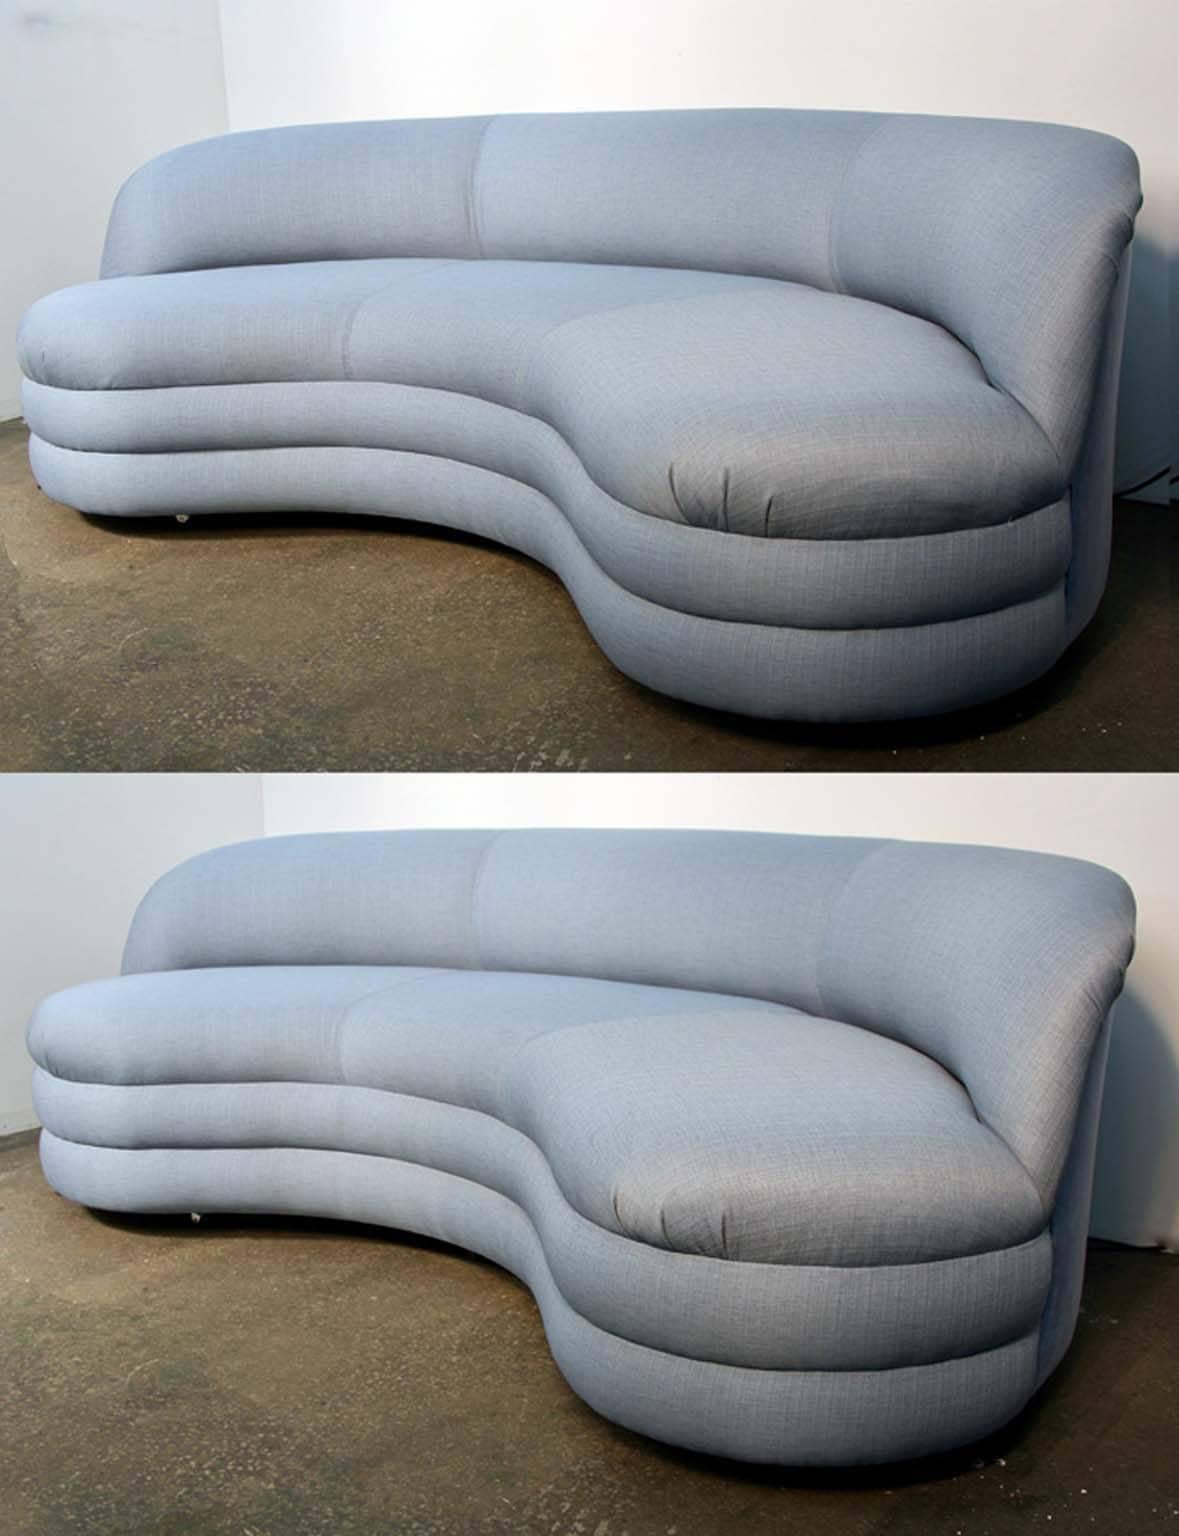 Amazing pair of sofas attributed to Vladimir Kagan for Directional. Brand newly upholstered in blue woven fabric front and matching velvet back. Meticulously done. 